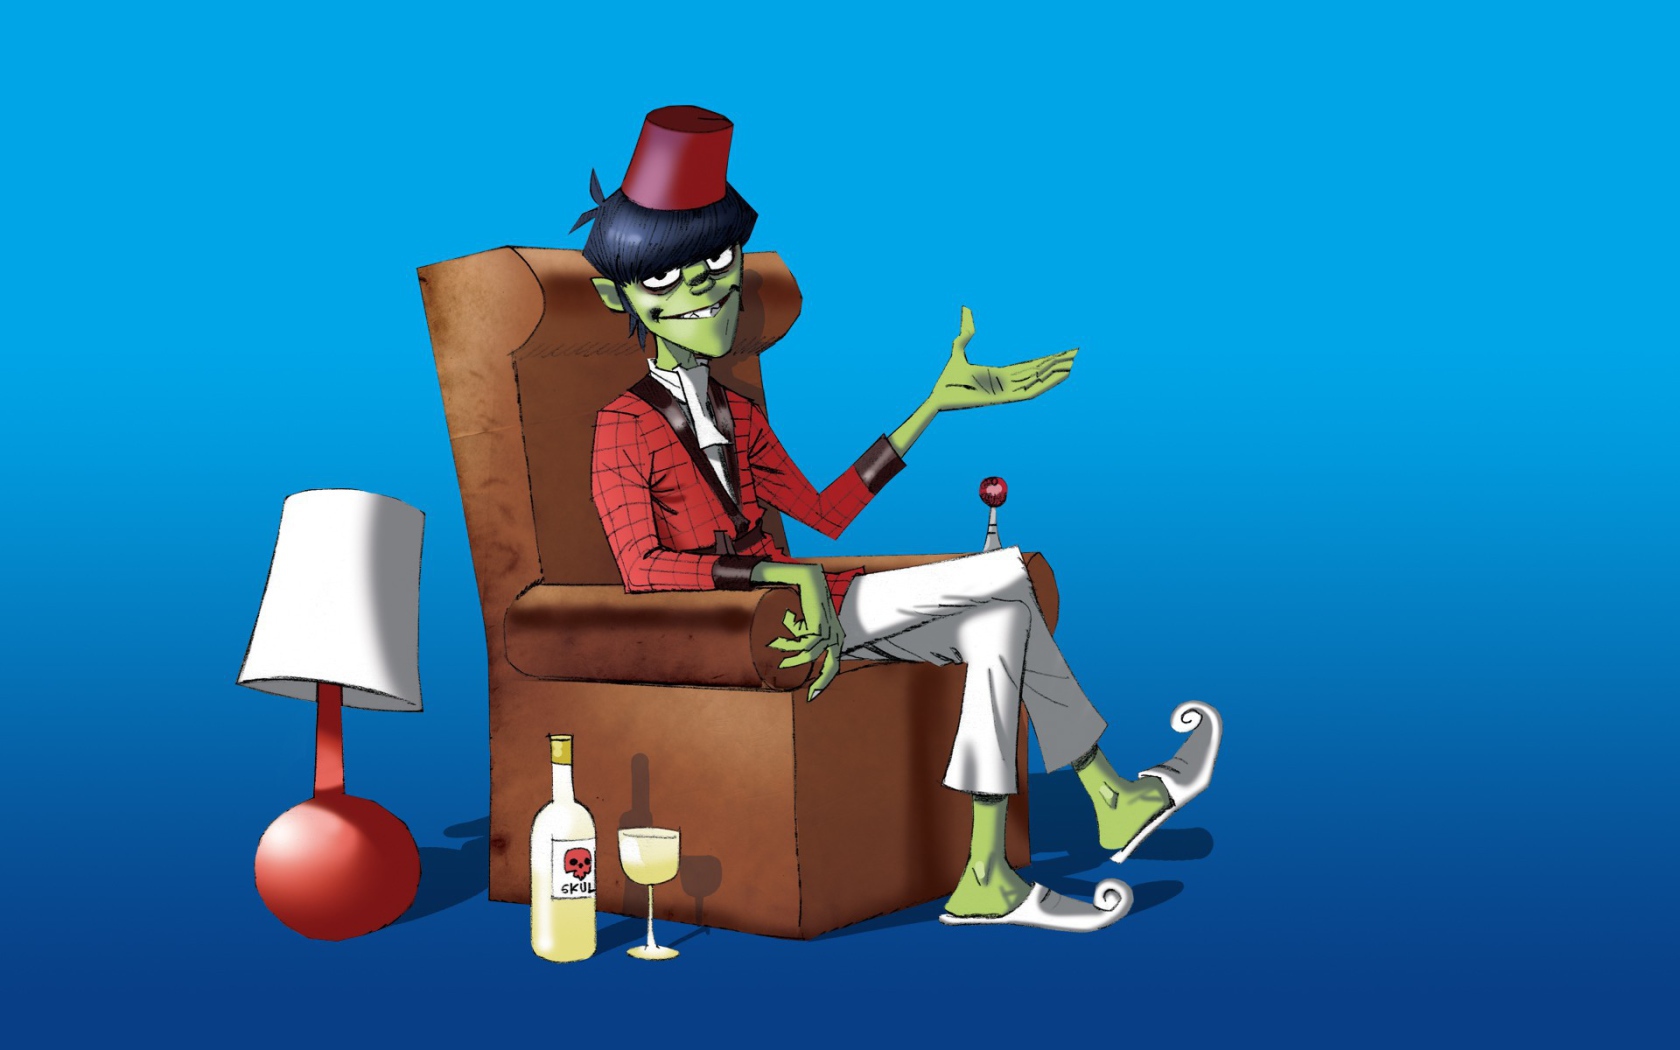 Zombies sitting on a chair, cartoon